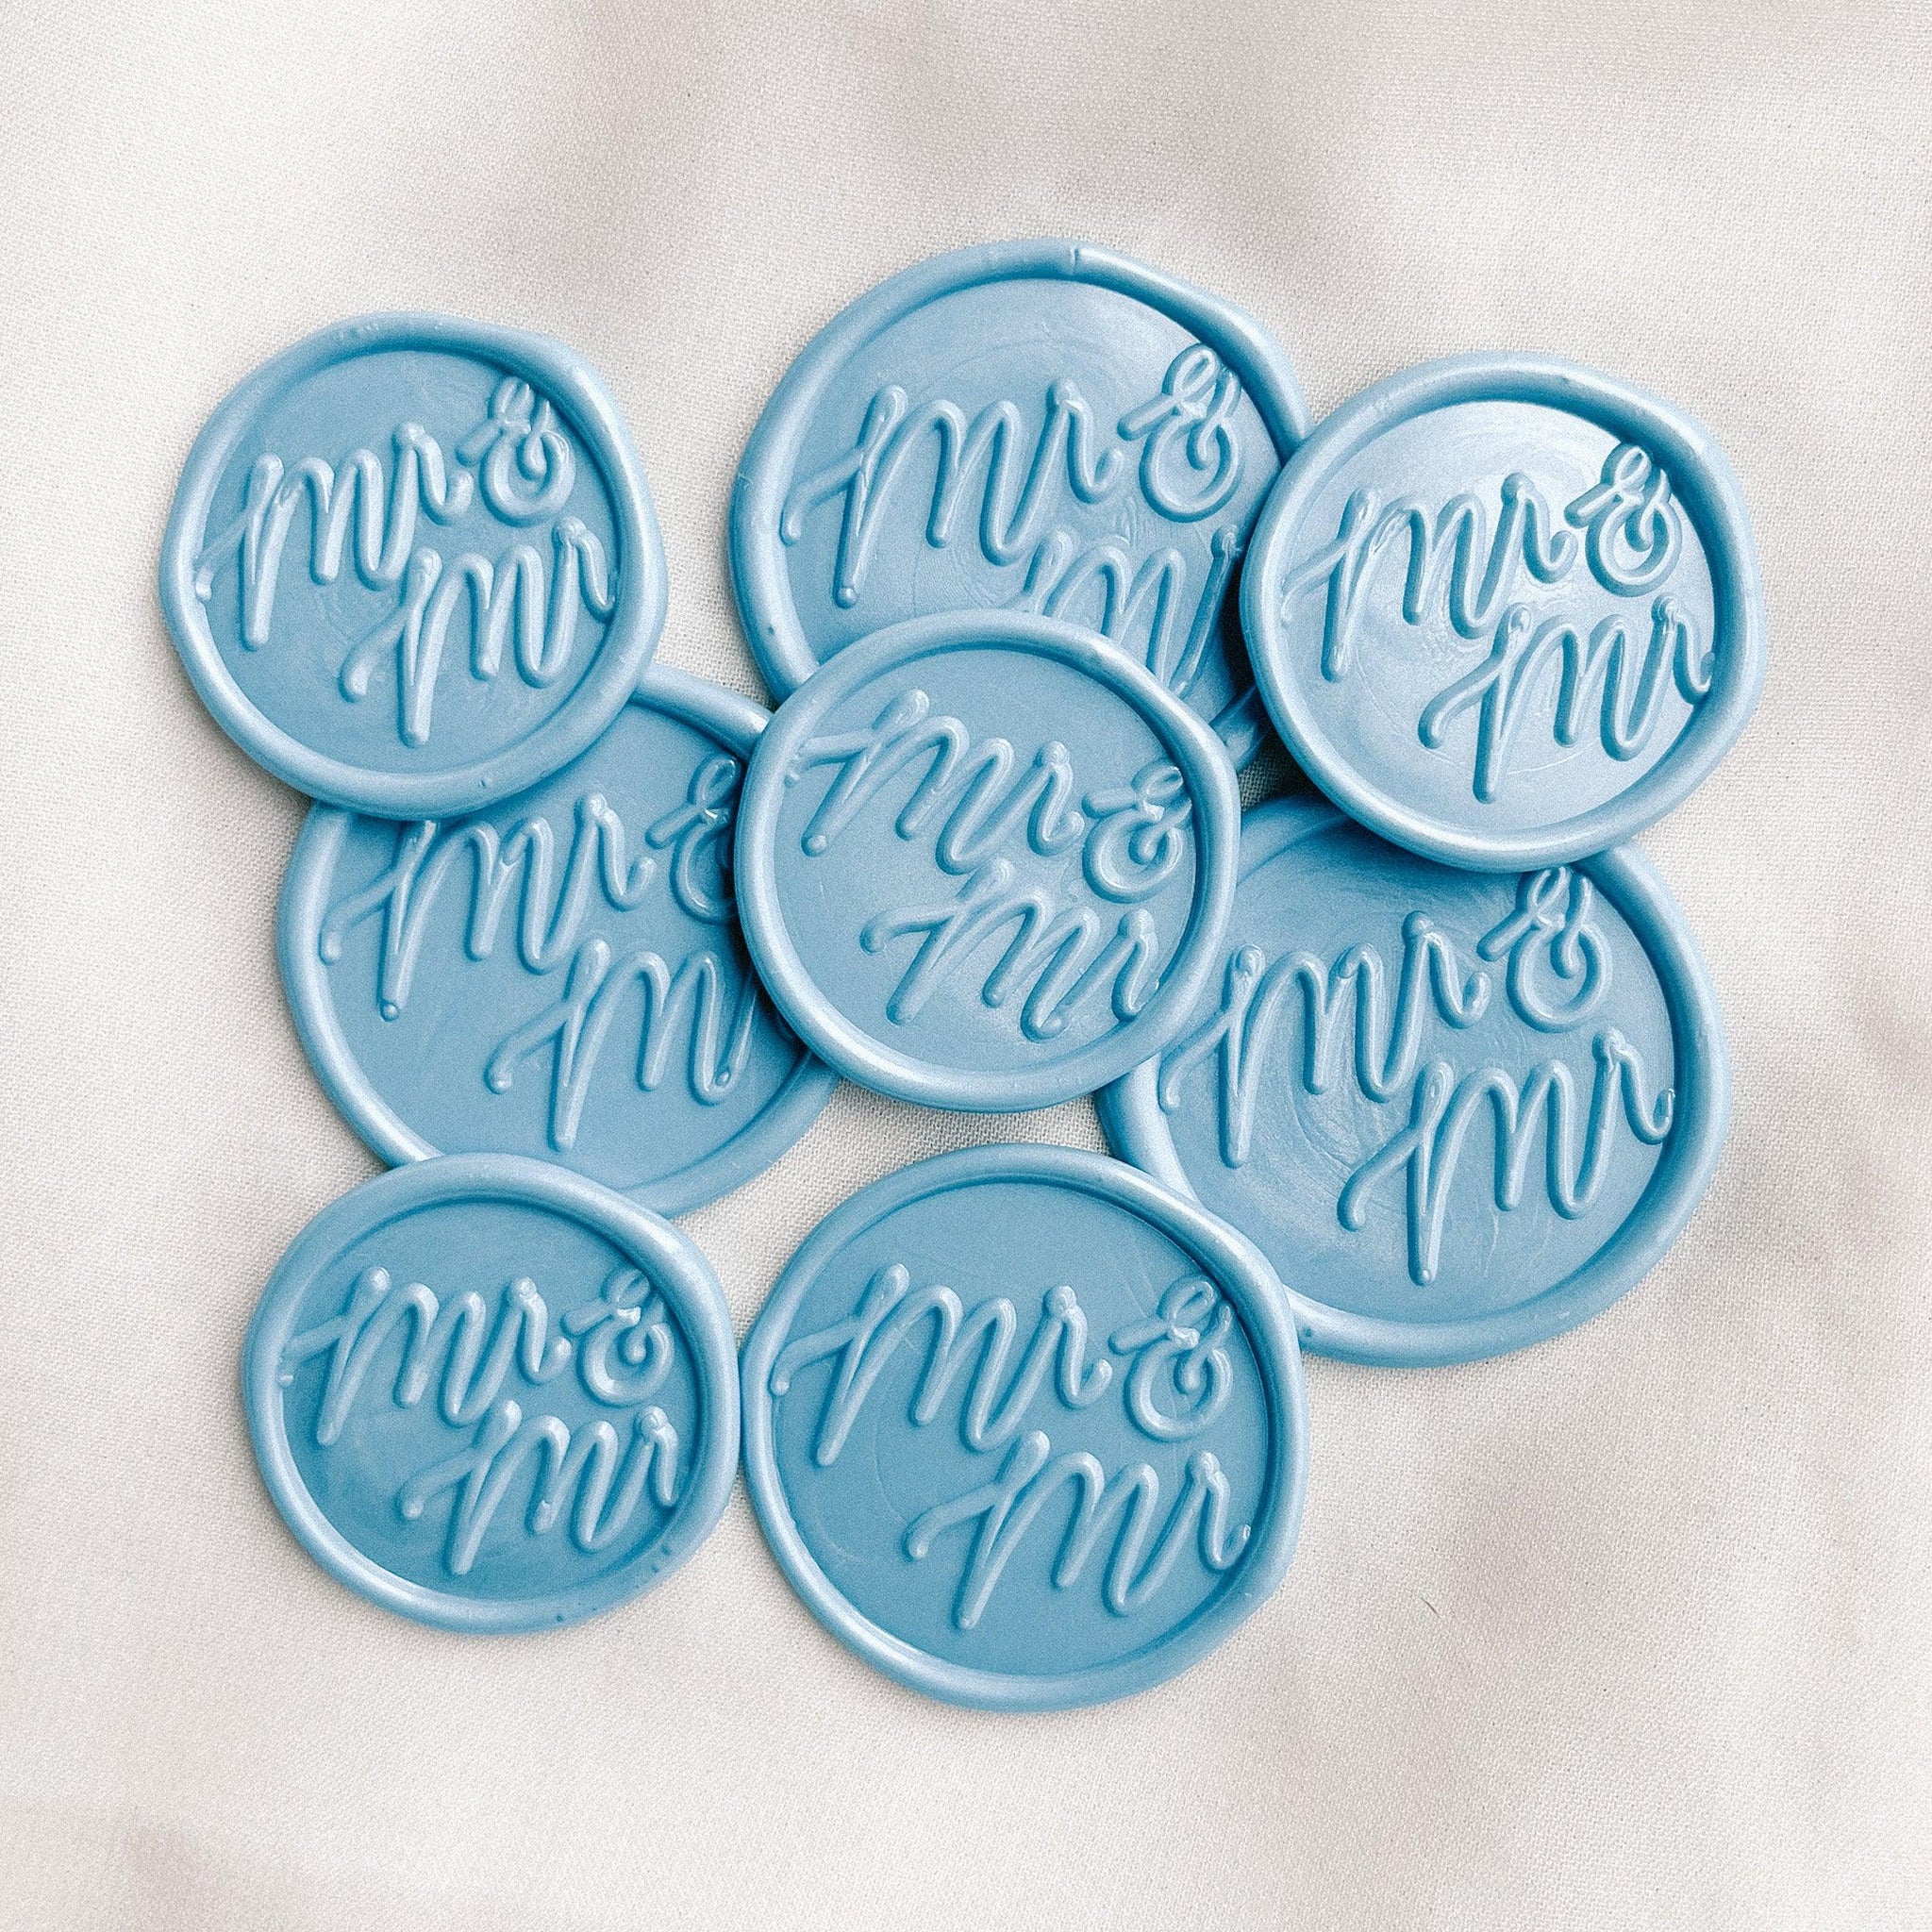 Mr & Mr wax seals - Set of 9 - Made of Honour Co.